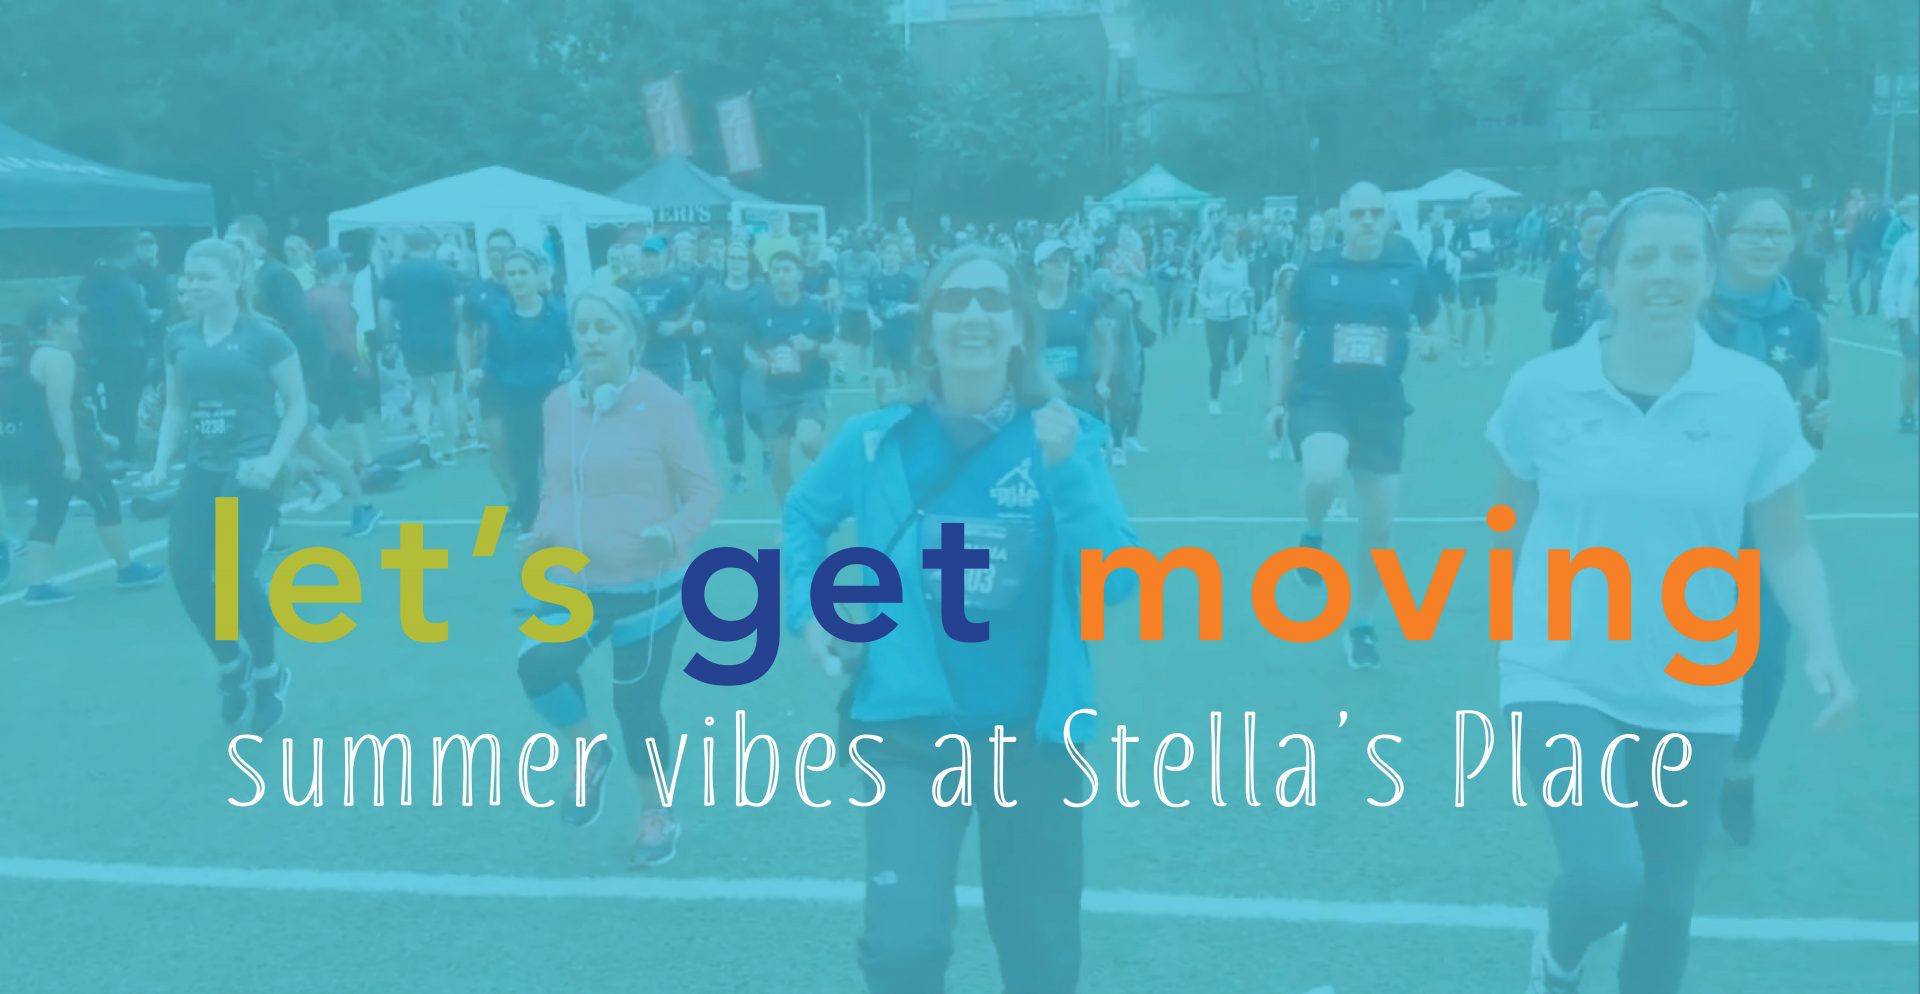 A duotone blue photo of a crowd of people exercising in a sports field. Catherine Dyer and Donna Green are in the foreground, in motion. Overlaid on the photo is a heading "let's get moving" in green, purple and orange. Underneath is a subheading "summer vibes at Stella's Place" in white.